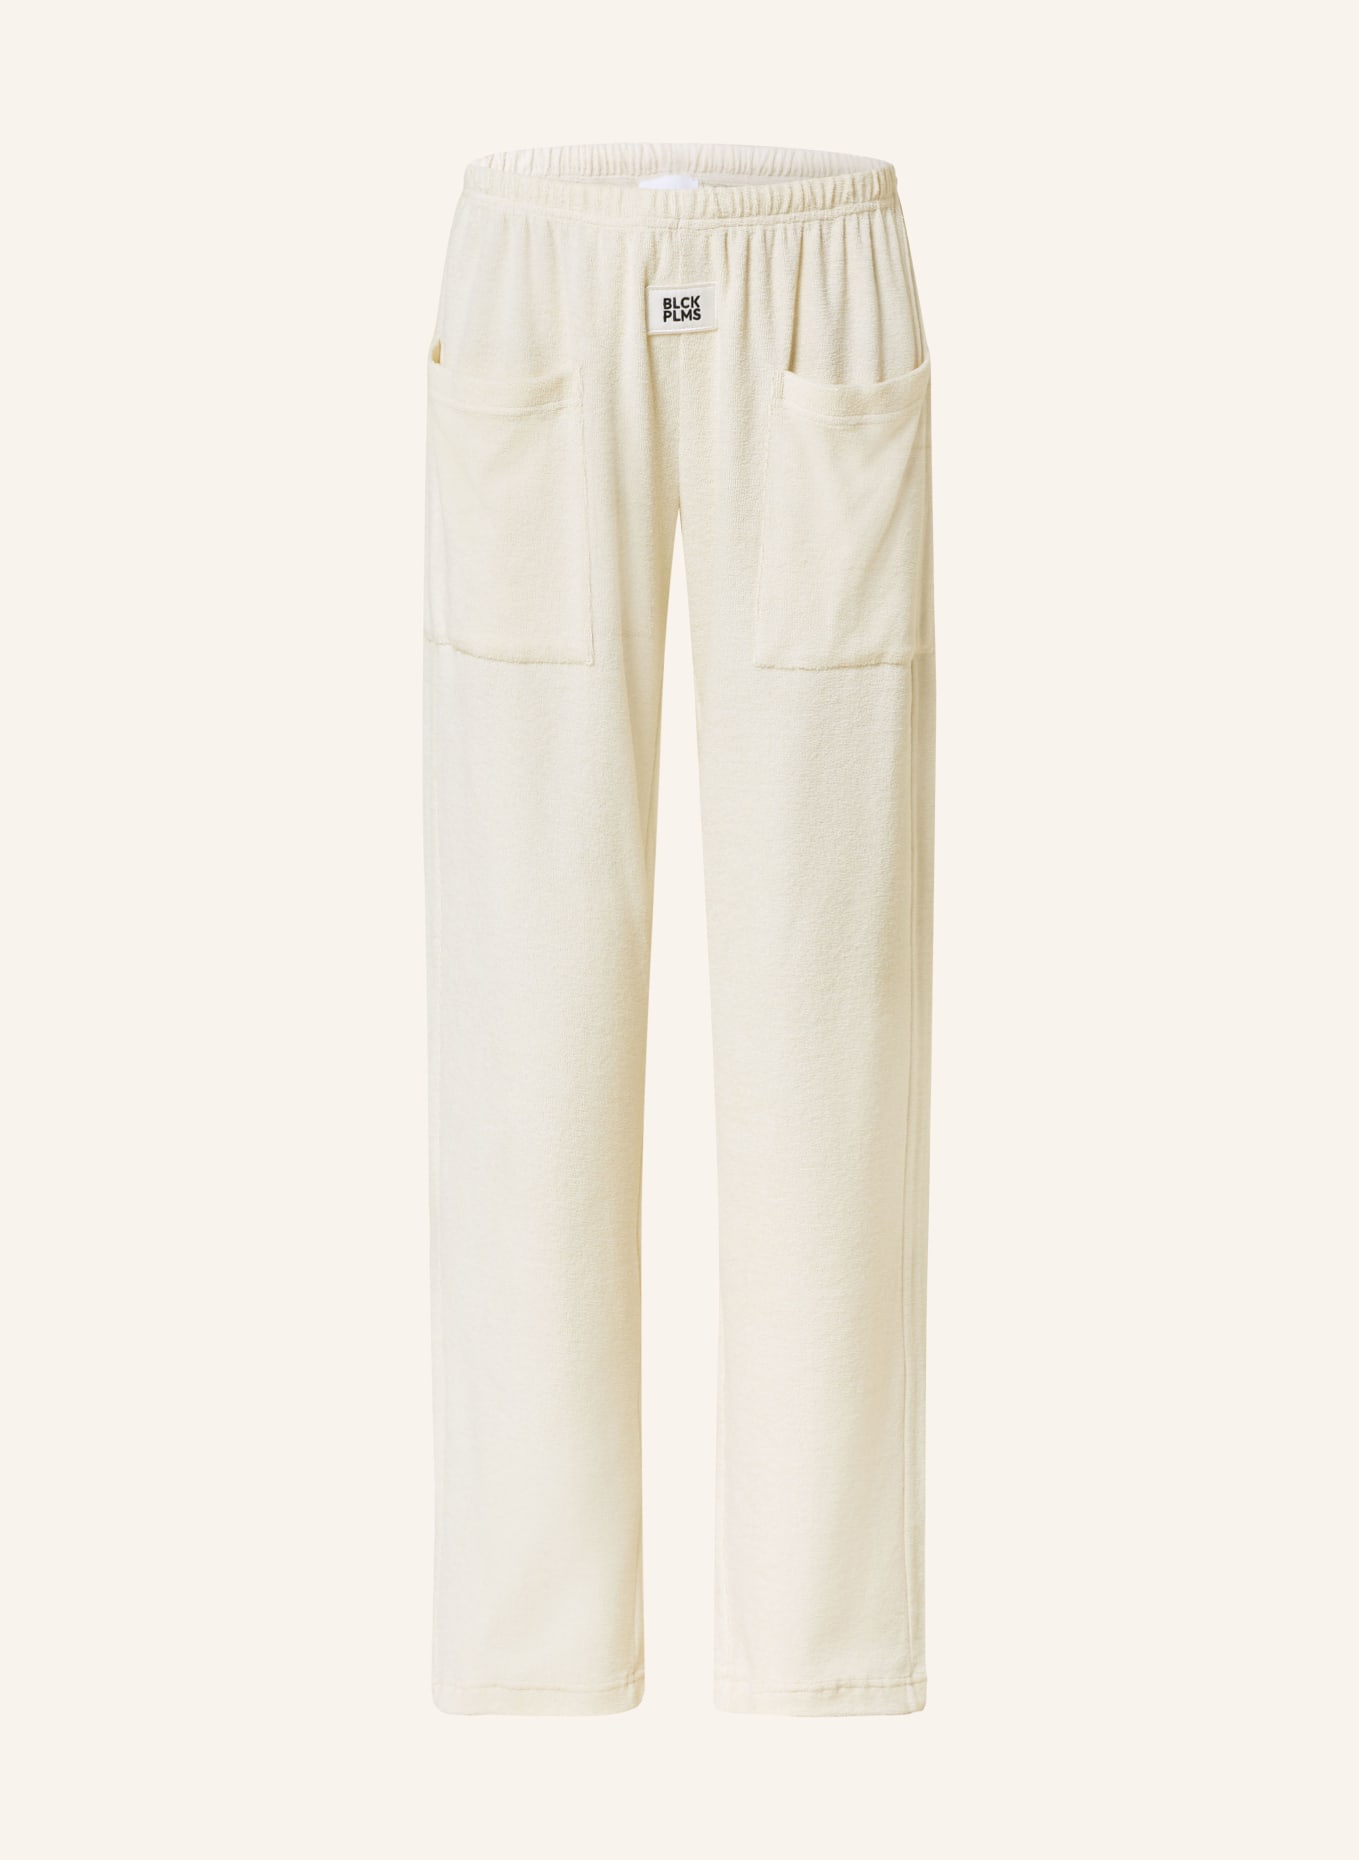 black palms Terry cloth pants in jogger style, Color: CREAM (Image 1)